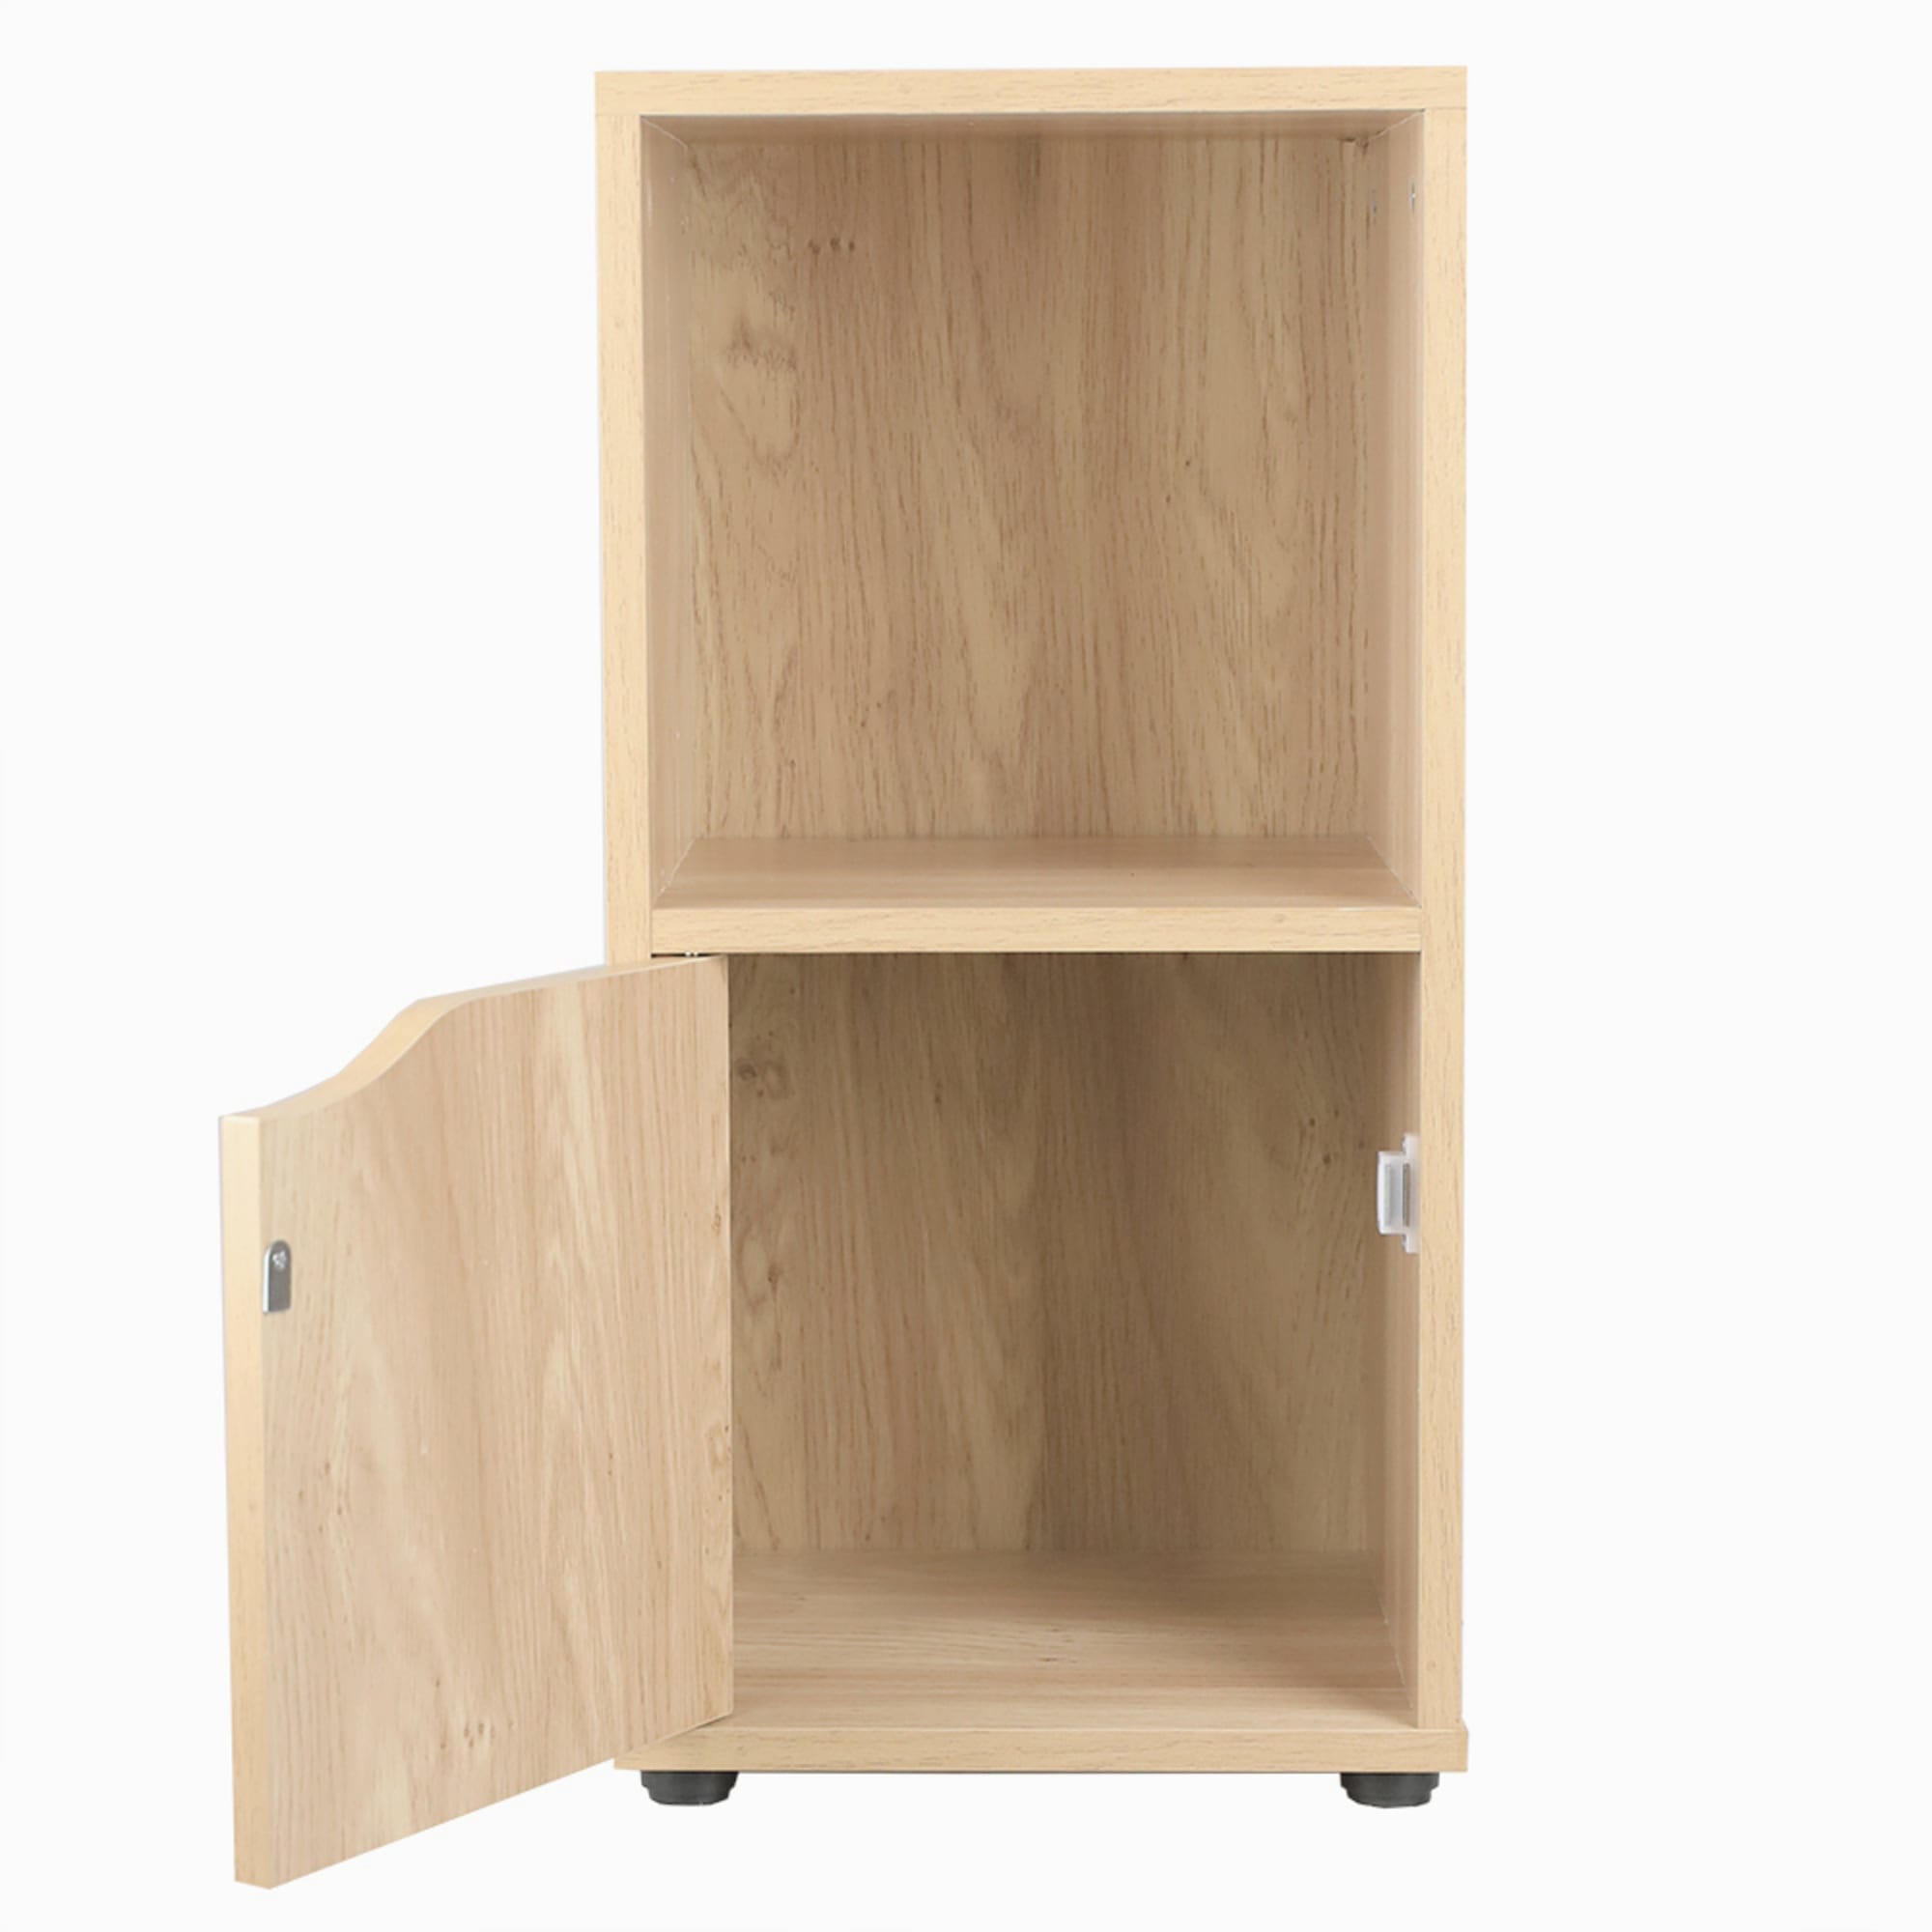 Home Basics 2 Cube MDF Storage Shelf with Door, Natural $25.00 EACH, CASE PACK OF 1